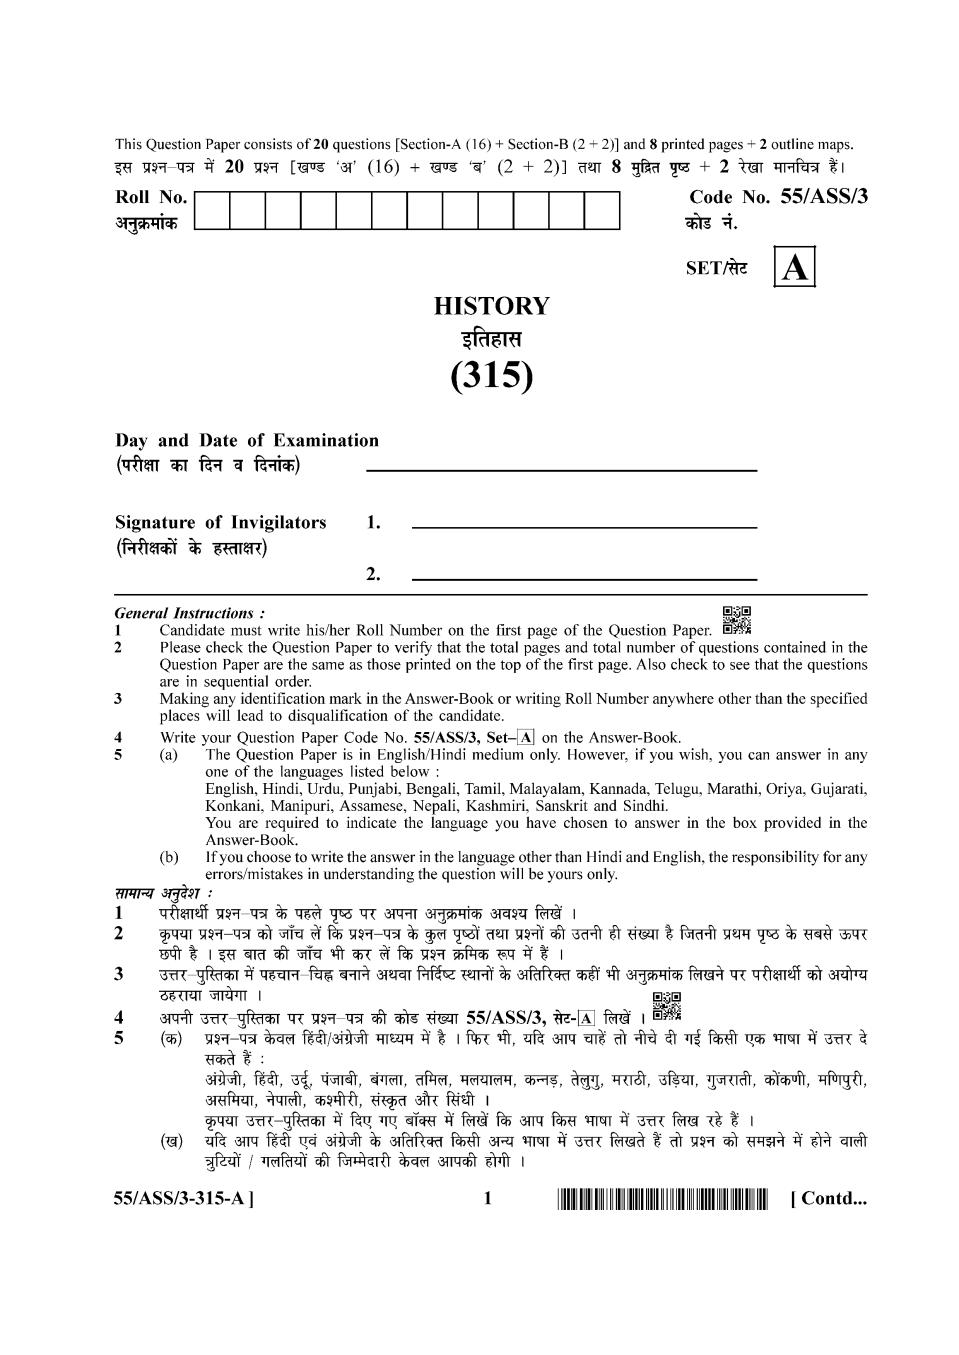 NIOS Class 12 Question Paper Oct 2017 - History - Page 1